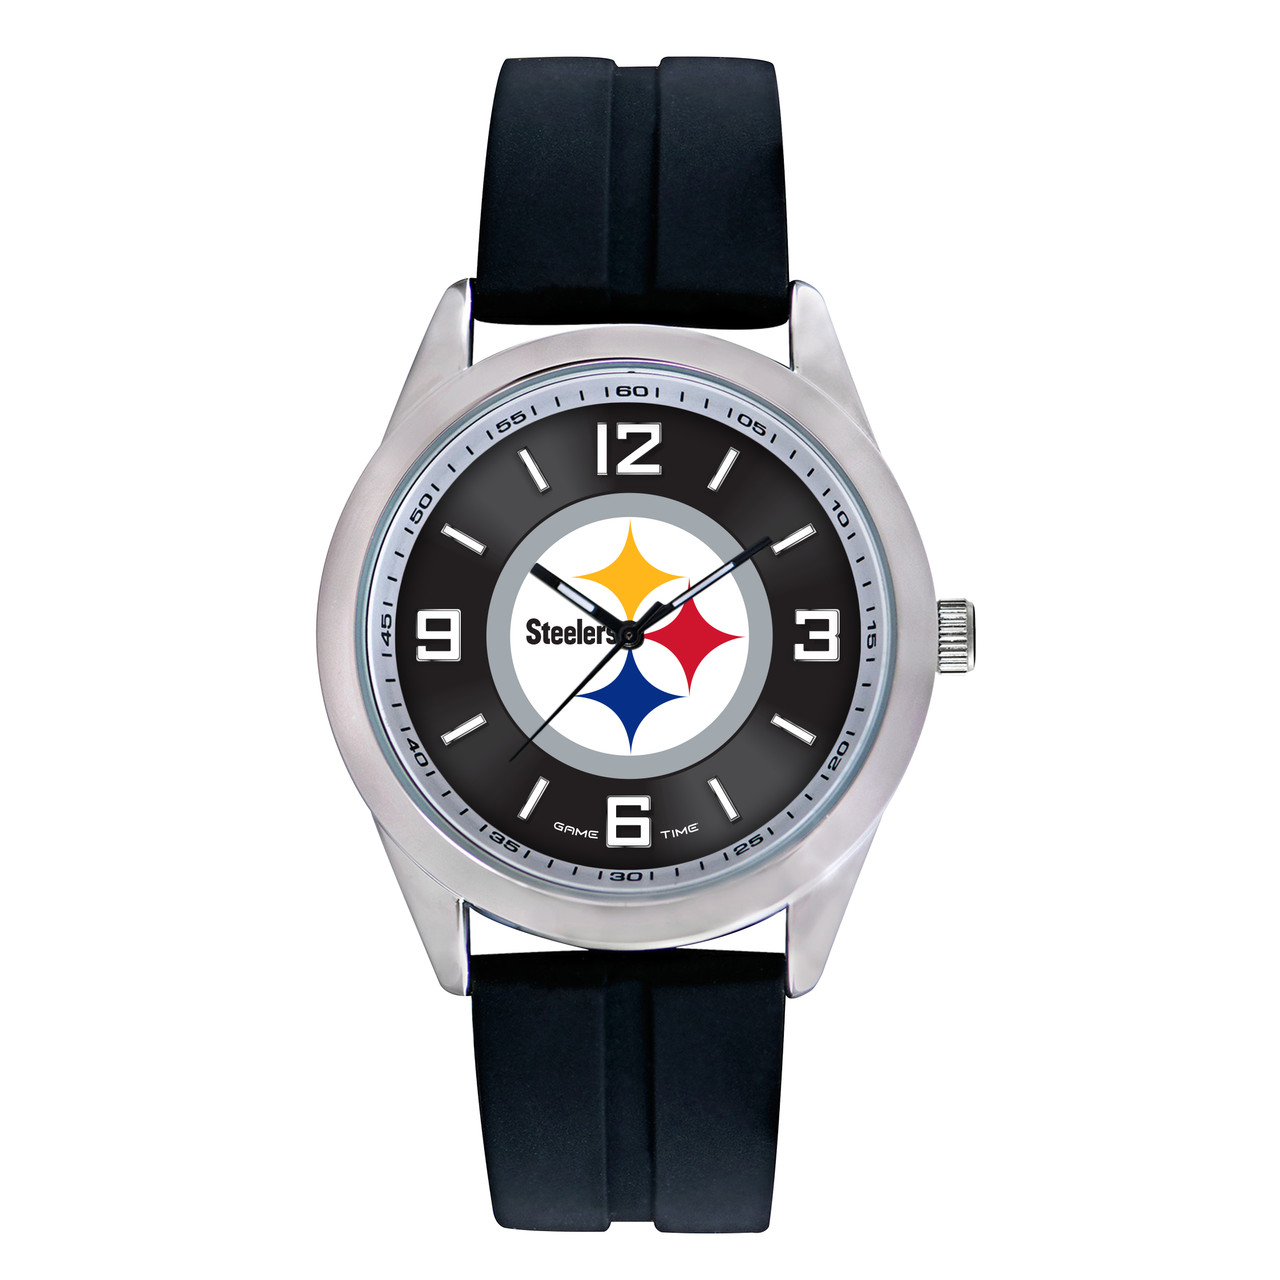 Pittsburgh Steelers Men's Watch - NFL Varsity Series - Game Time Watches